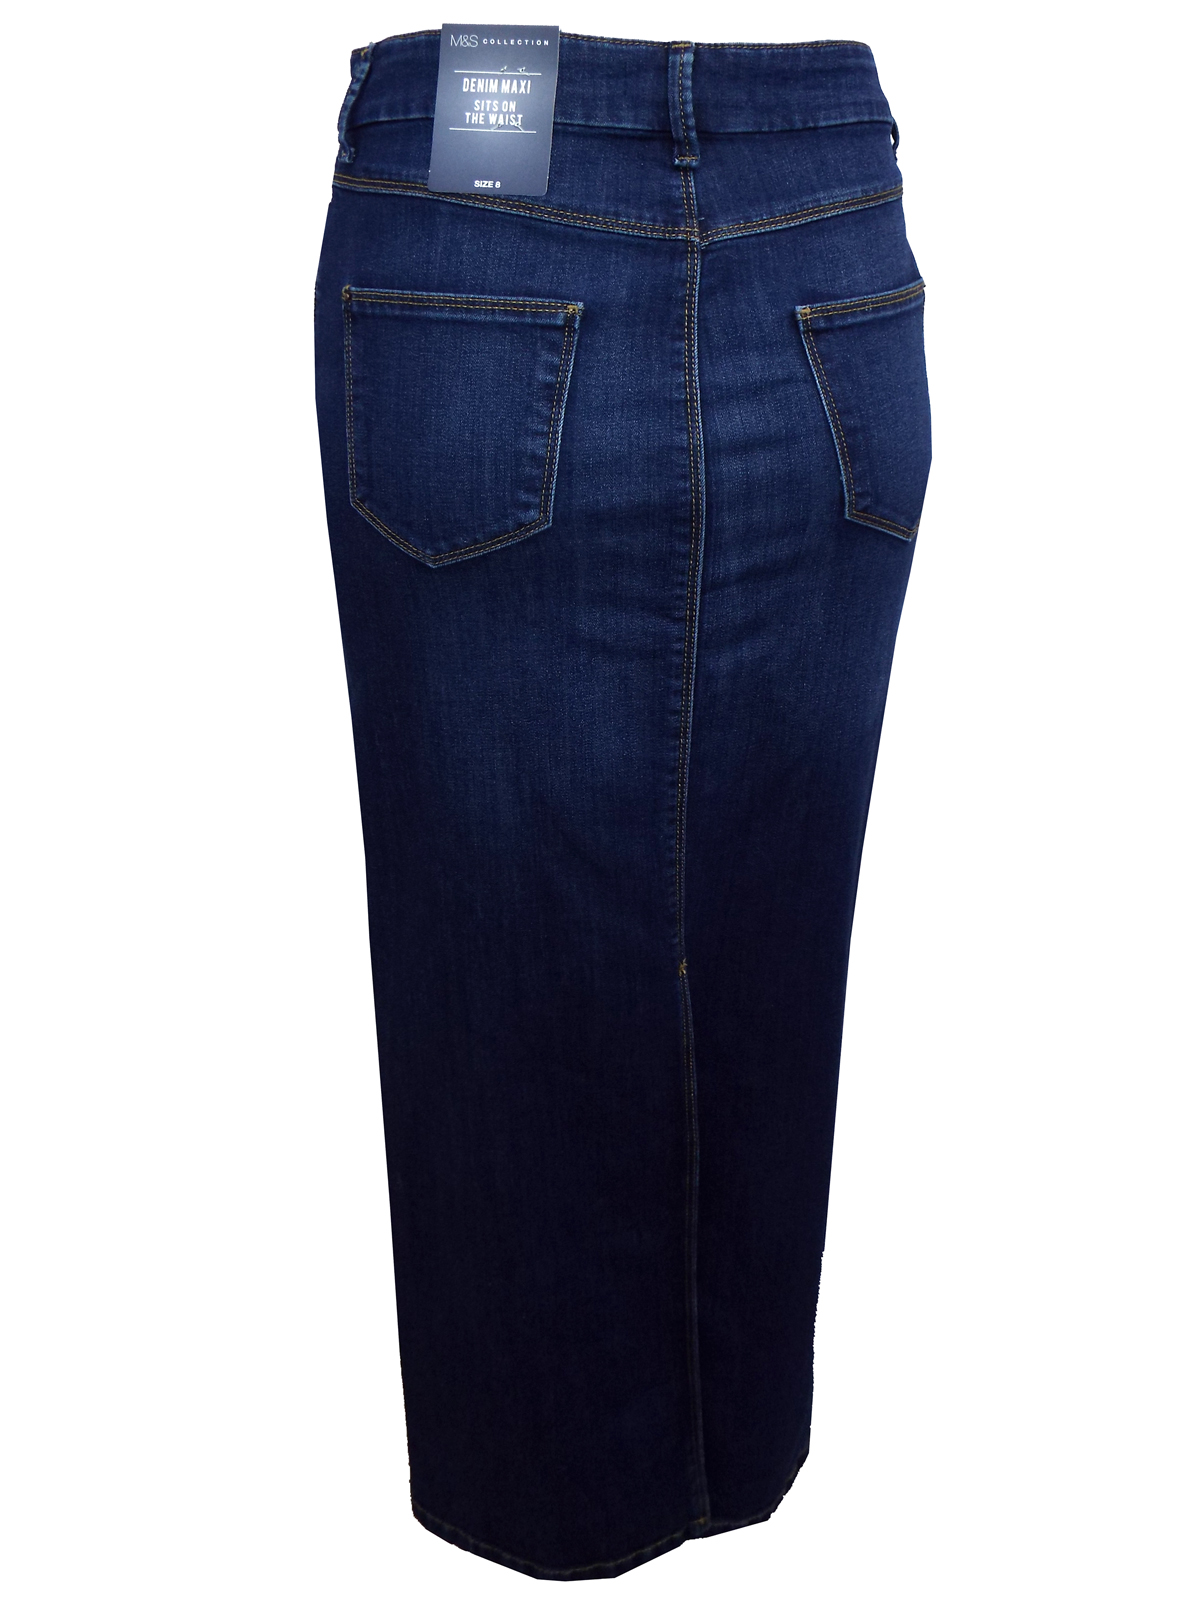 Marks and Spencer - - M&5 NAVY Cotton Rich Long Denim Skirt 39inches ...